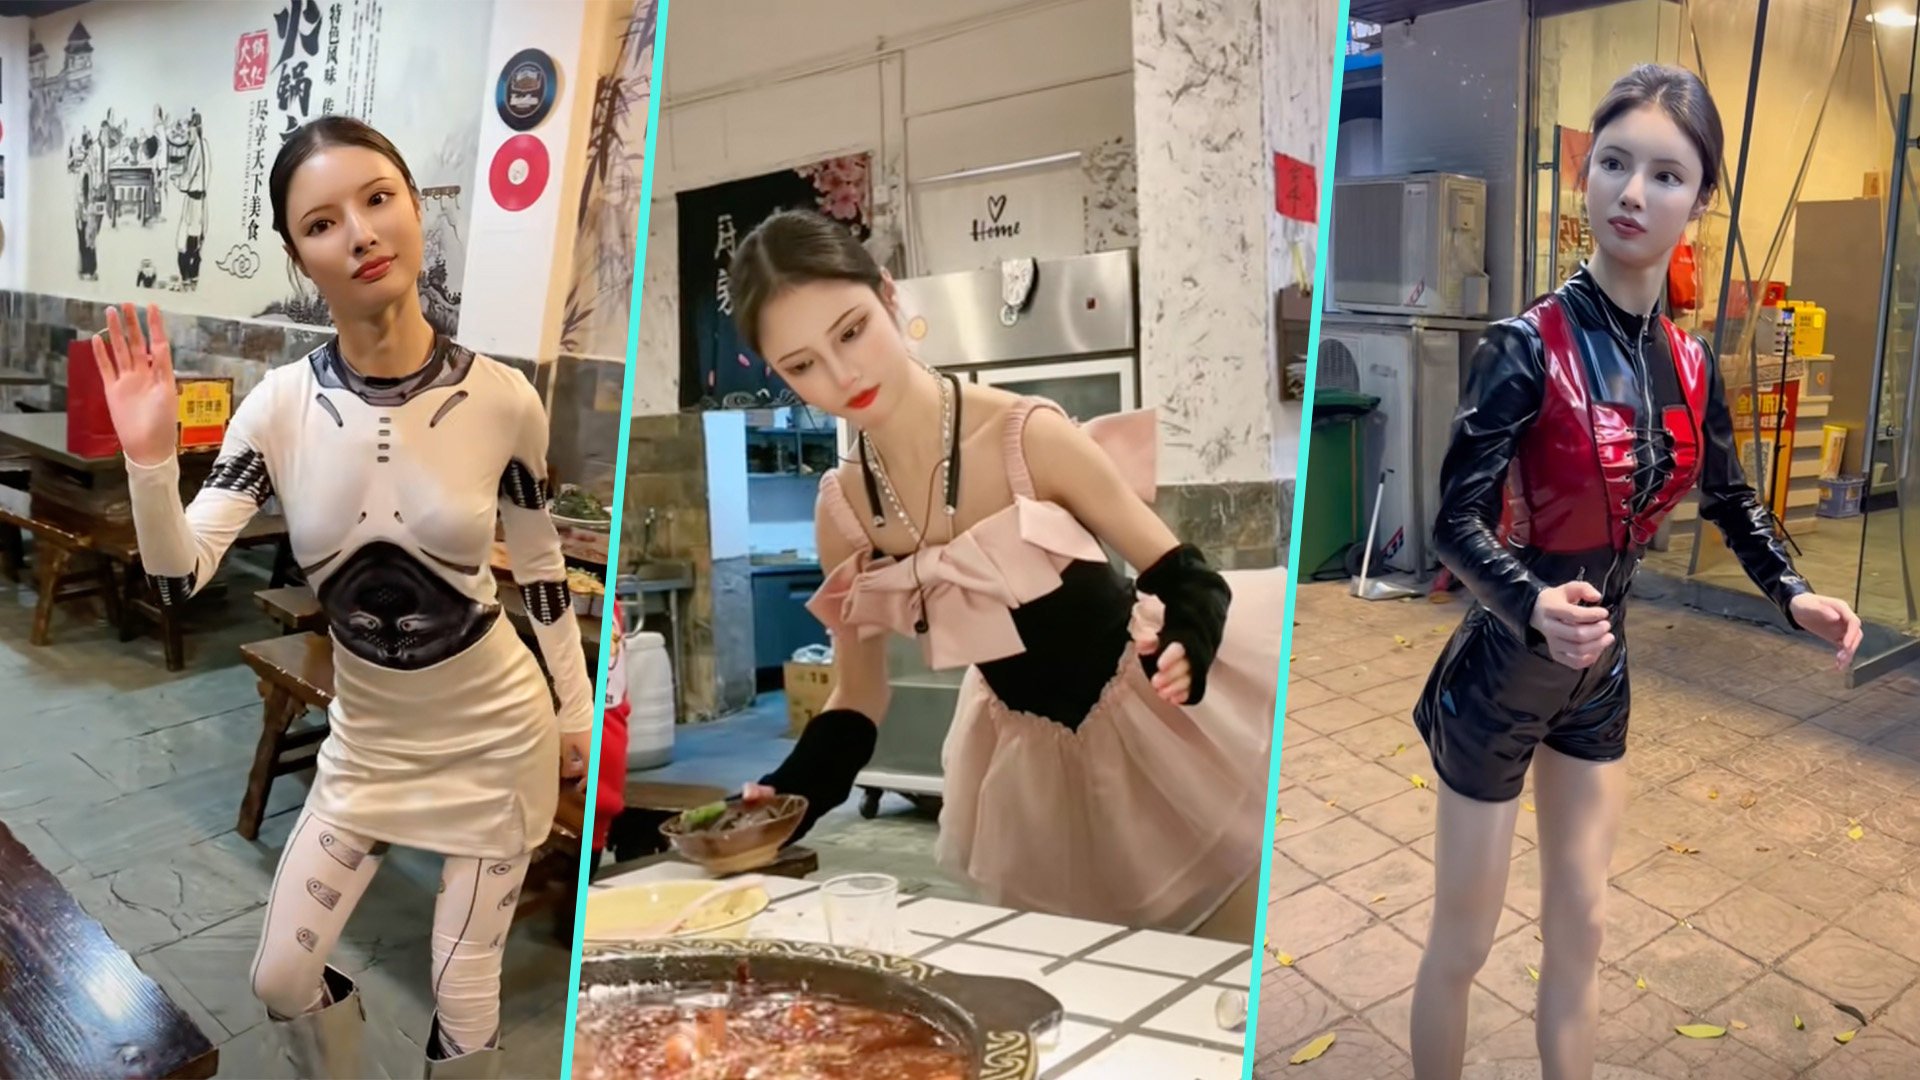 A restaurant owner in China has delighted customers and become an international online hit by mimicking a robot to serve people food. Photo: SCMP composite/Douyin
